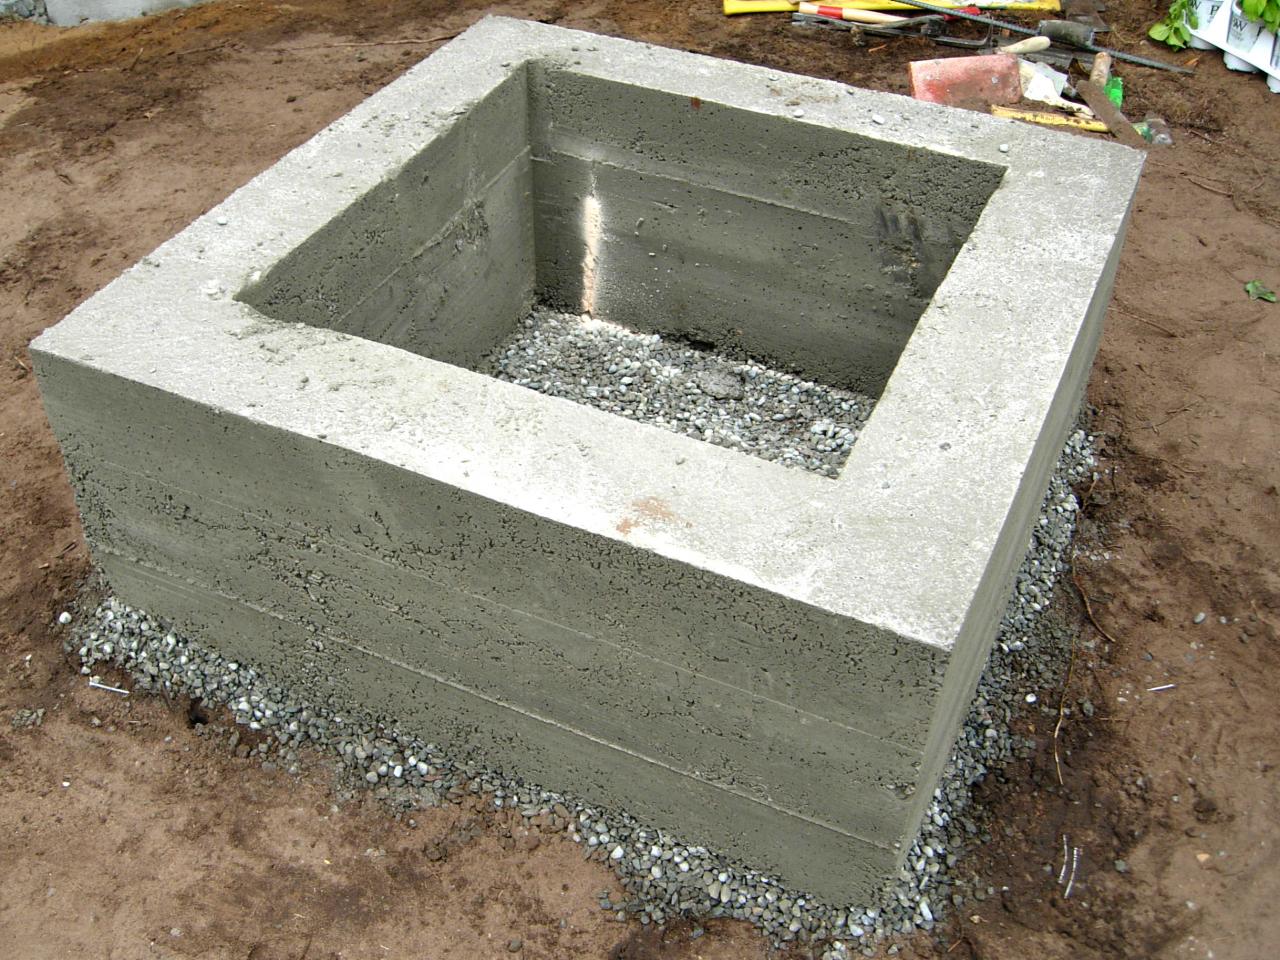 How To Make A Concrete Fire Feature - How To Make A Concrete Fire Table